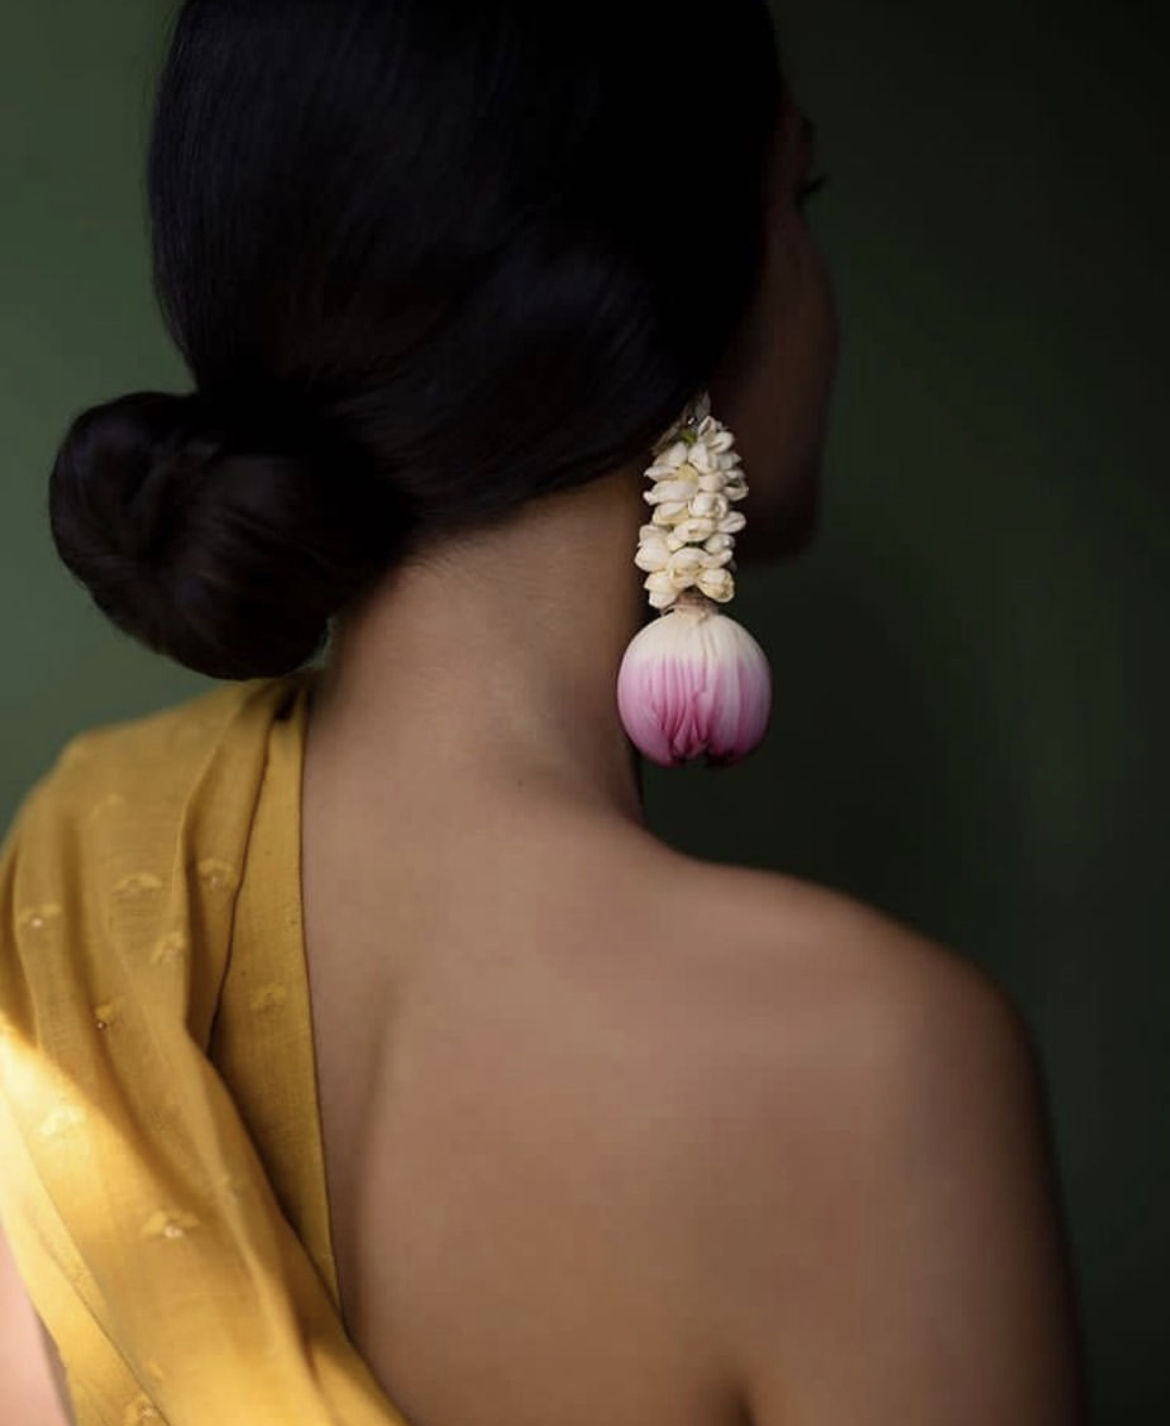 Beautiful floral earrings on person of color